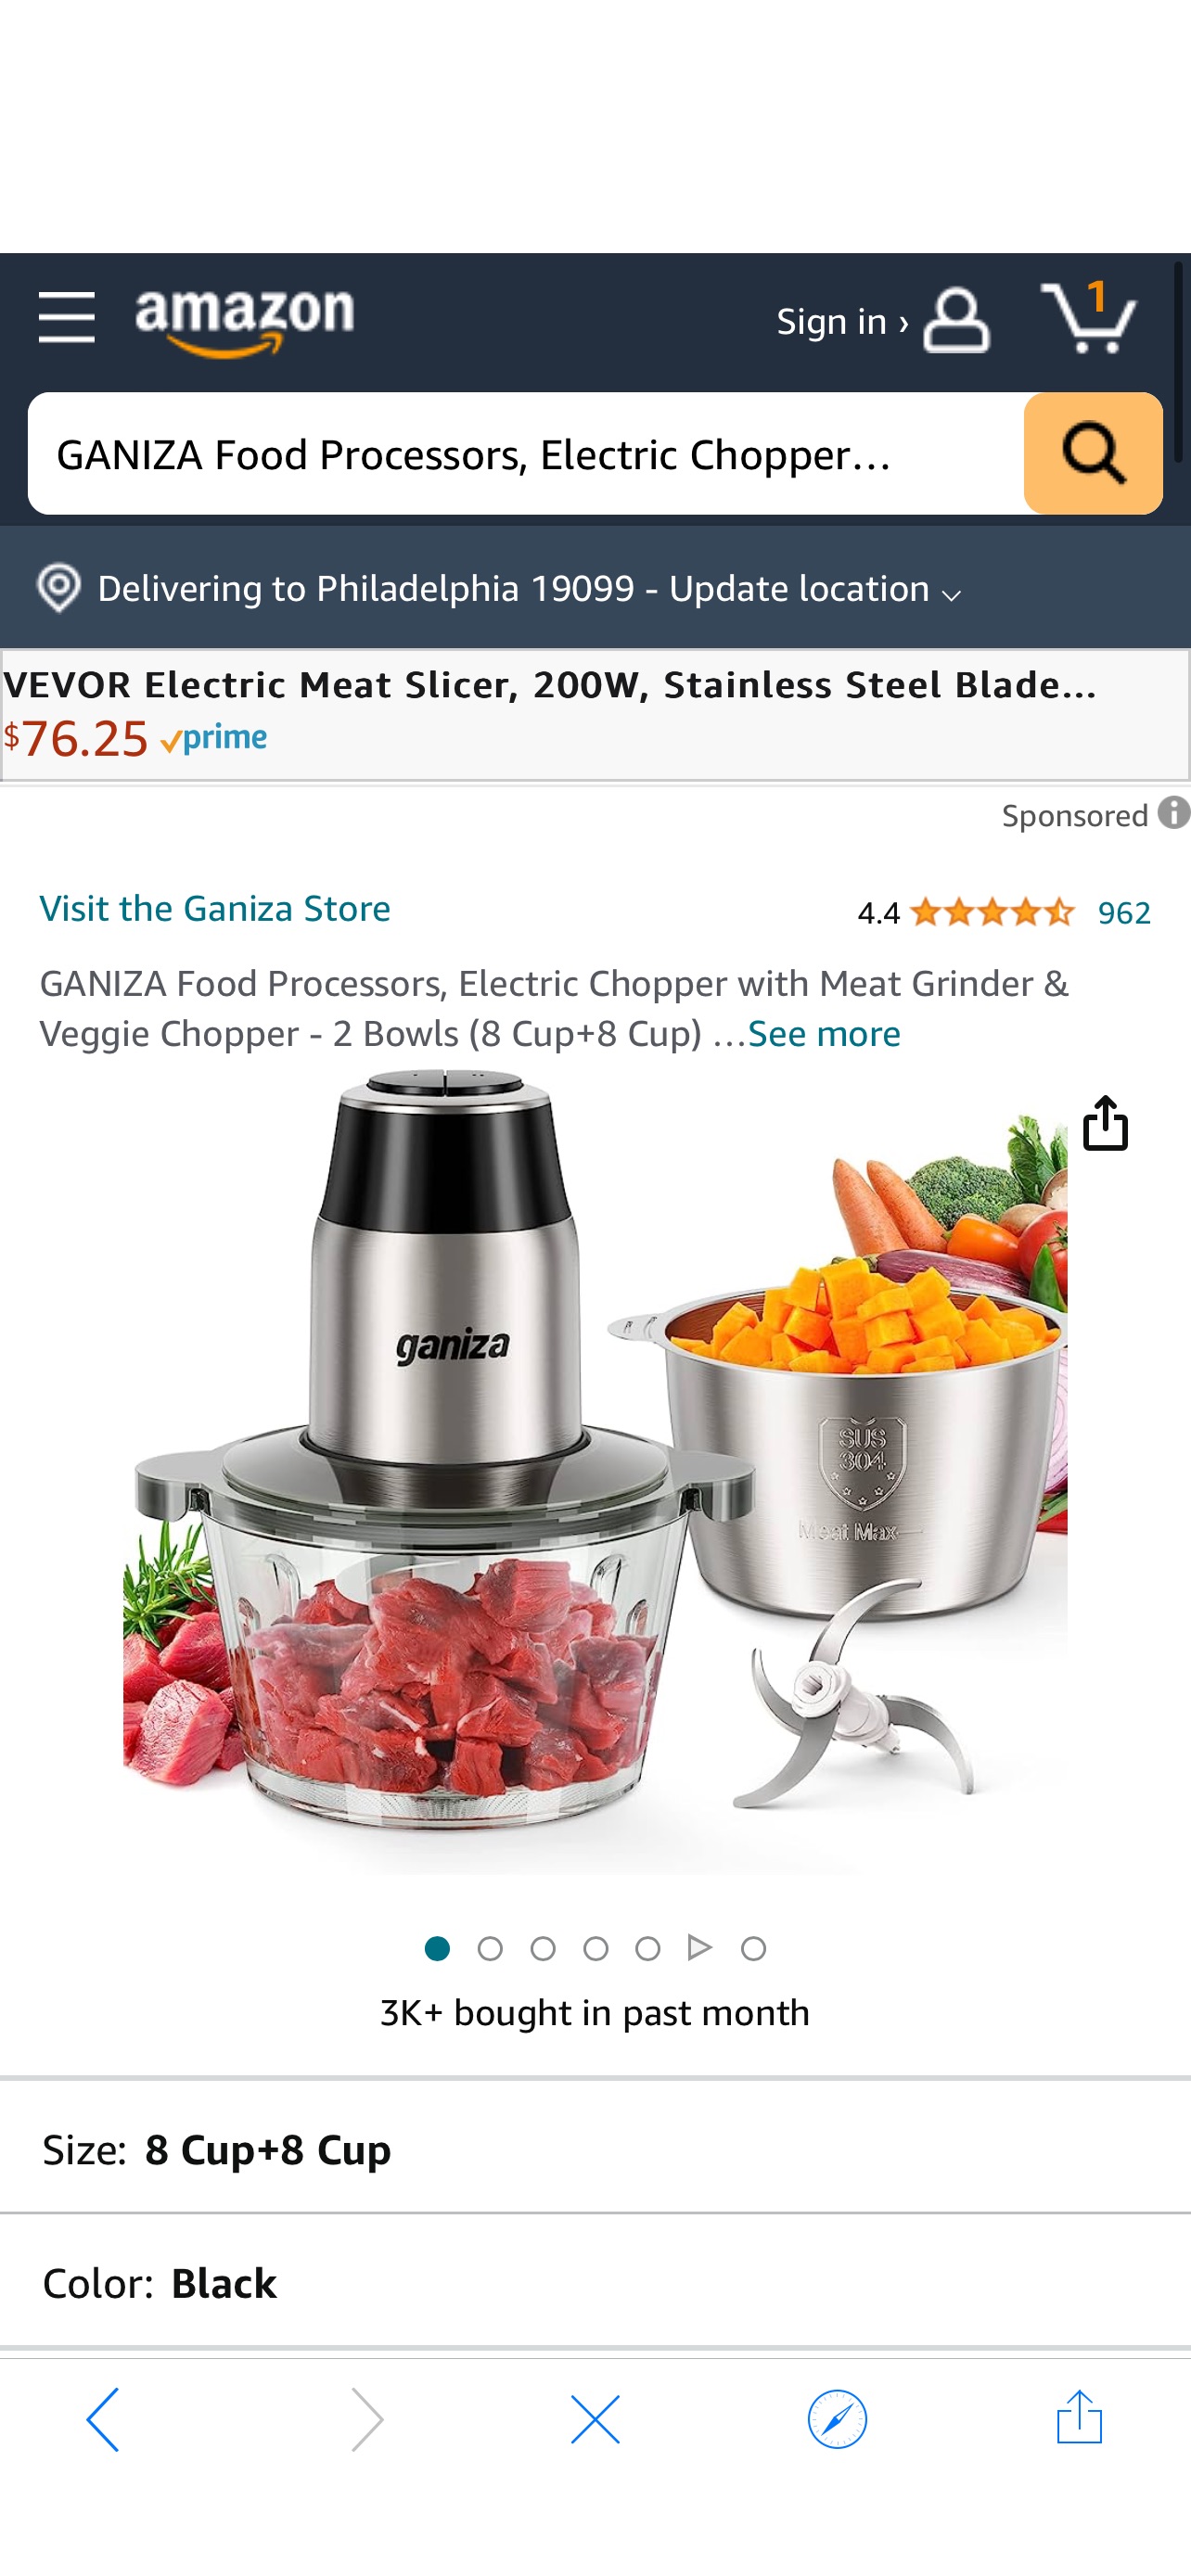 Amazon.com: GANIZA Food Processors, Electric Chopper with Meat Grinder & Veggie Chopper - 2 Bowls (8 Cup+8 Cup) with Powerful 450W Copper Motor - Includes 2 Sets of Bi-Level Blades for Baby Food/Meat/